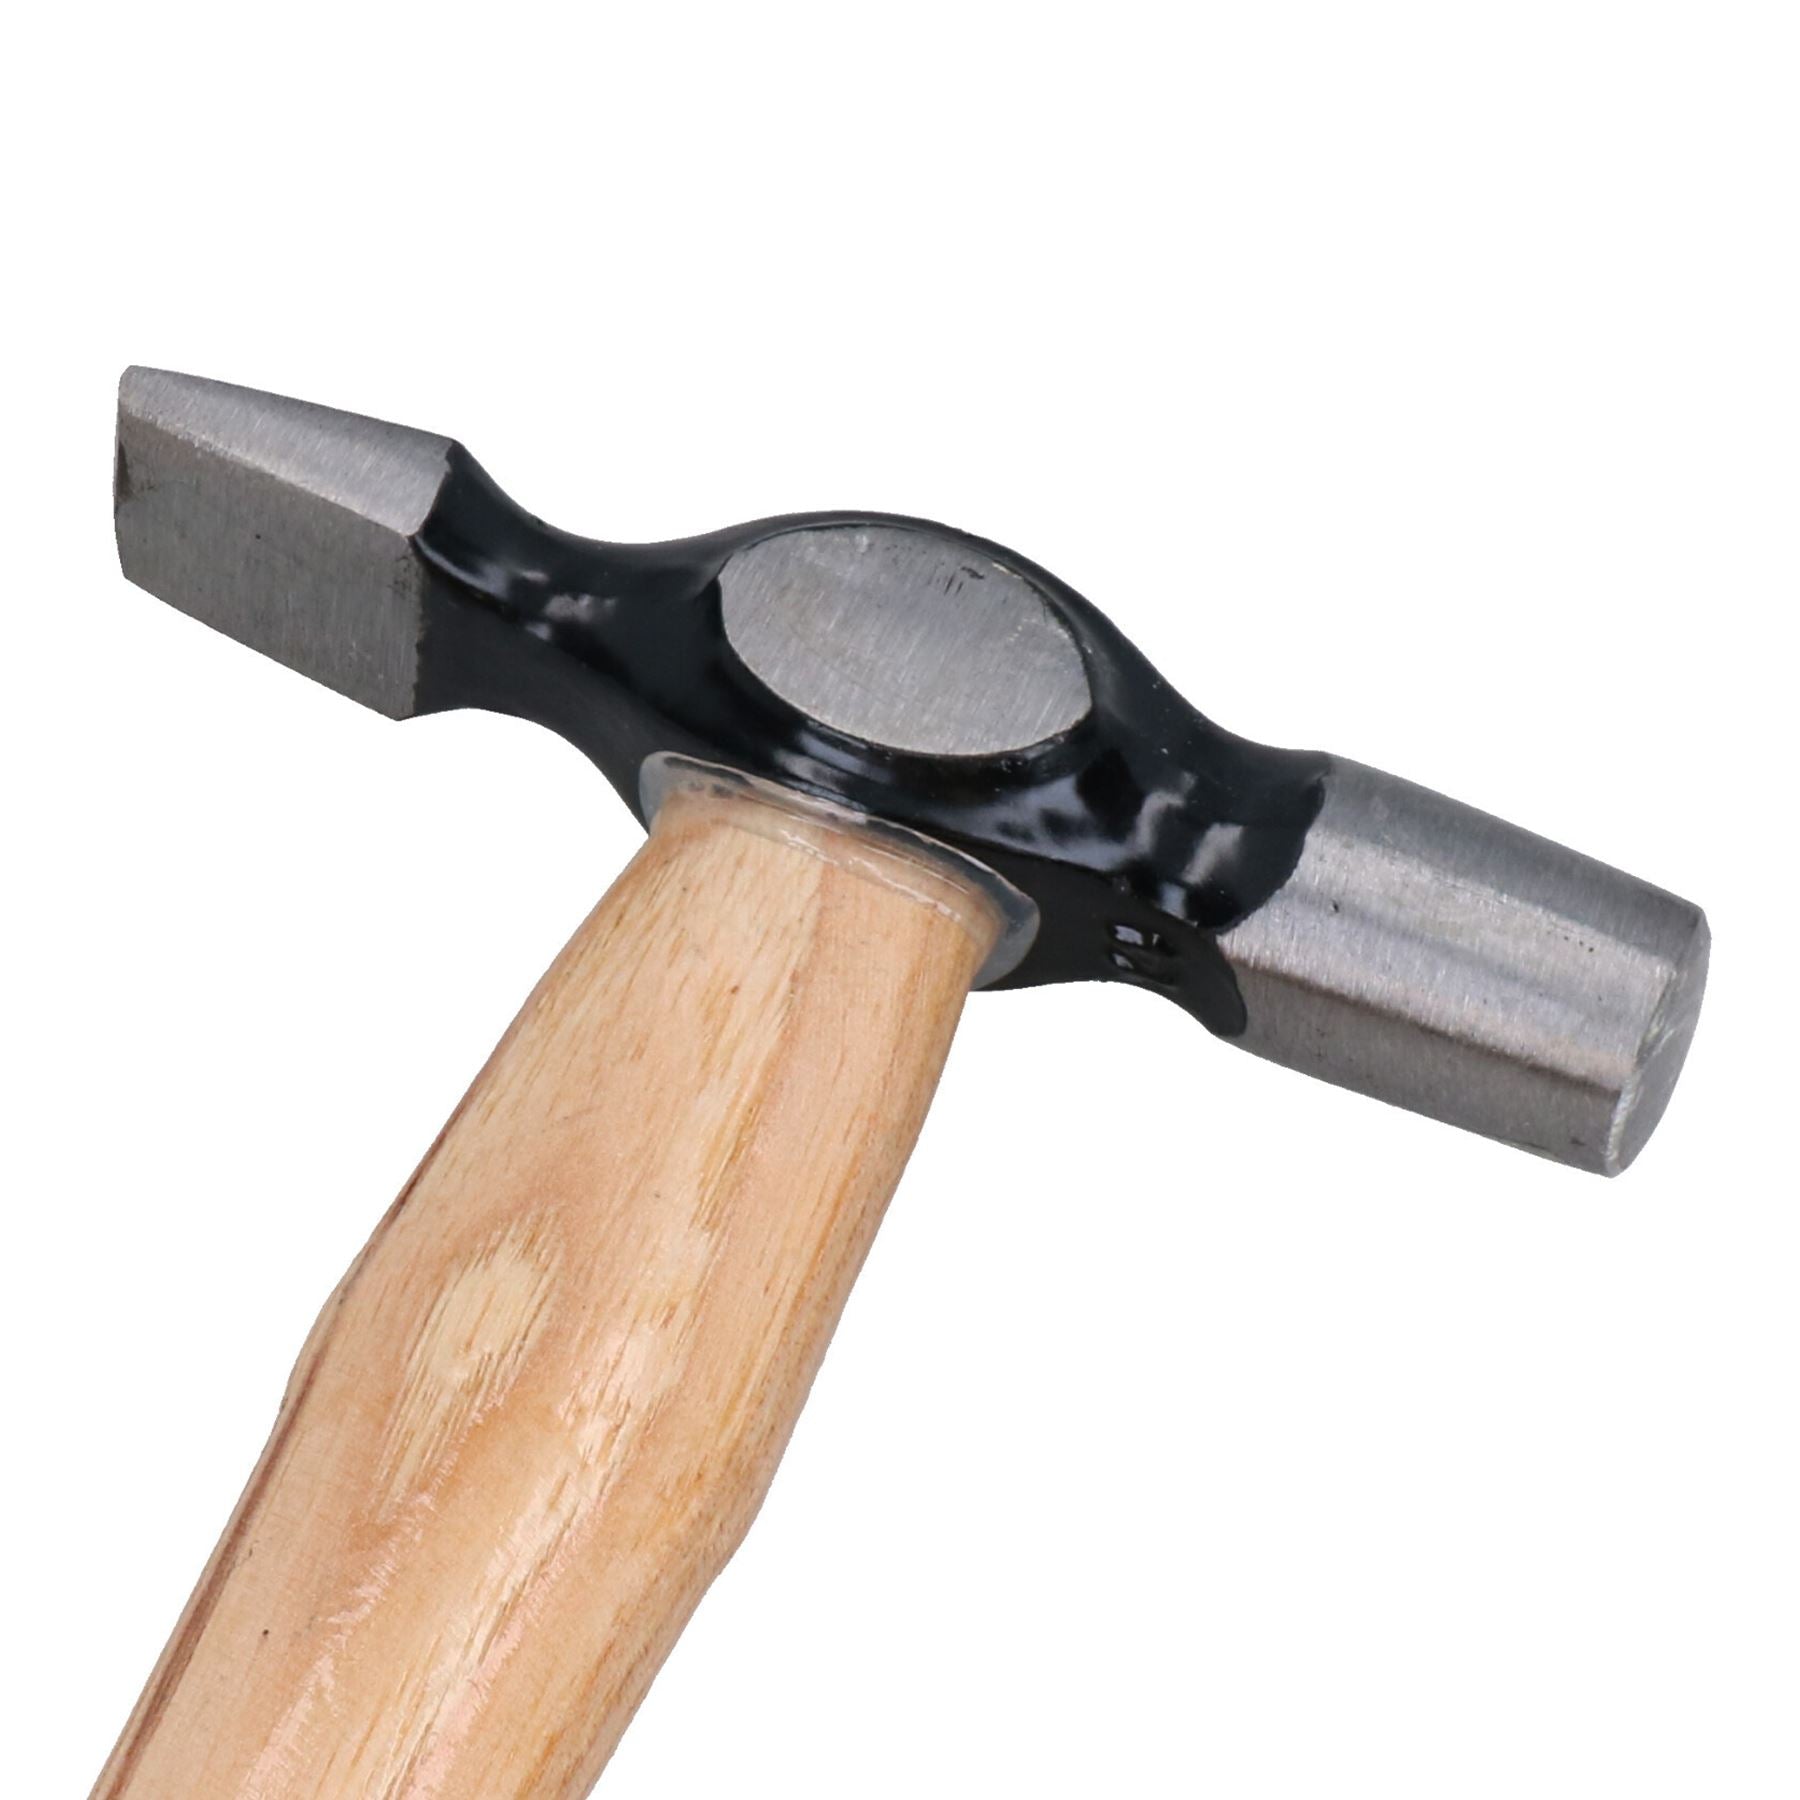 8oz Joiners Hammer Hickory Wooden Handle Shaft Joiners Carpenters